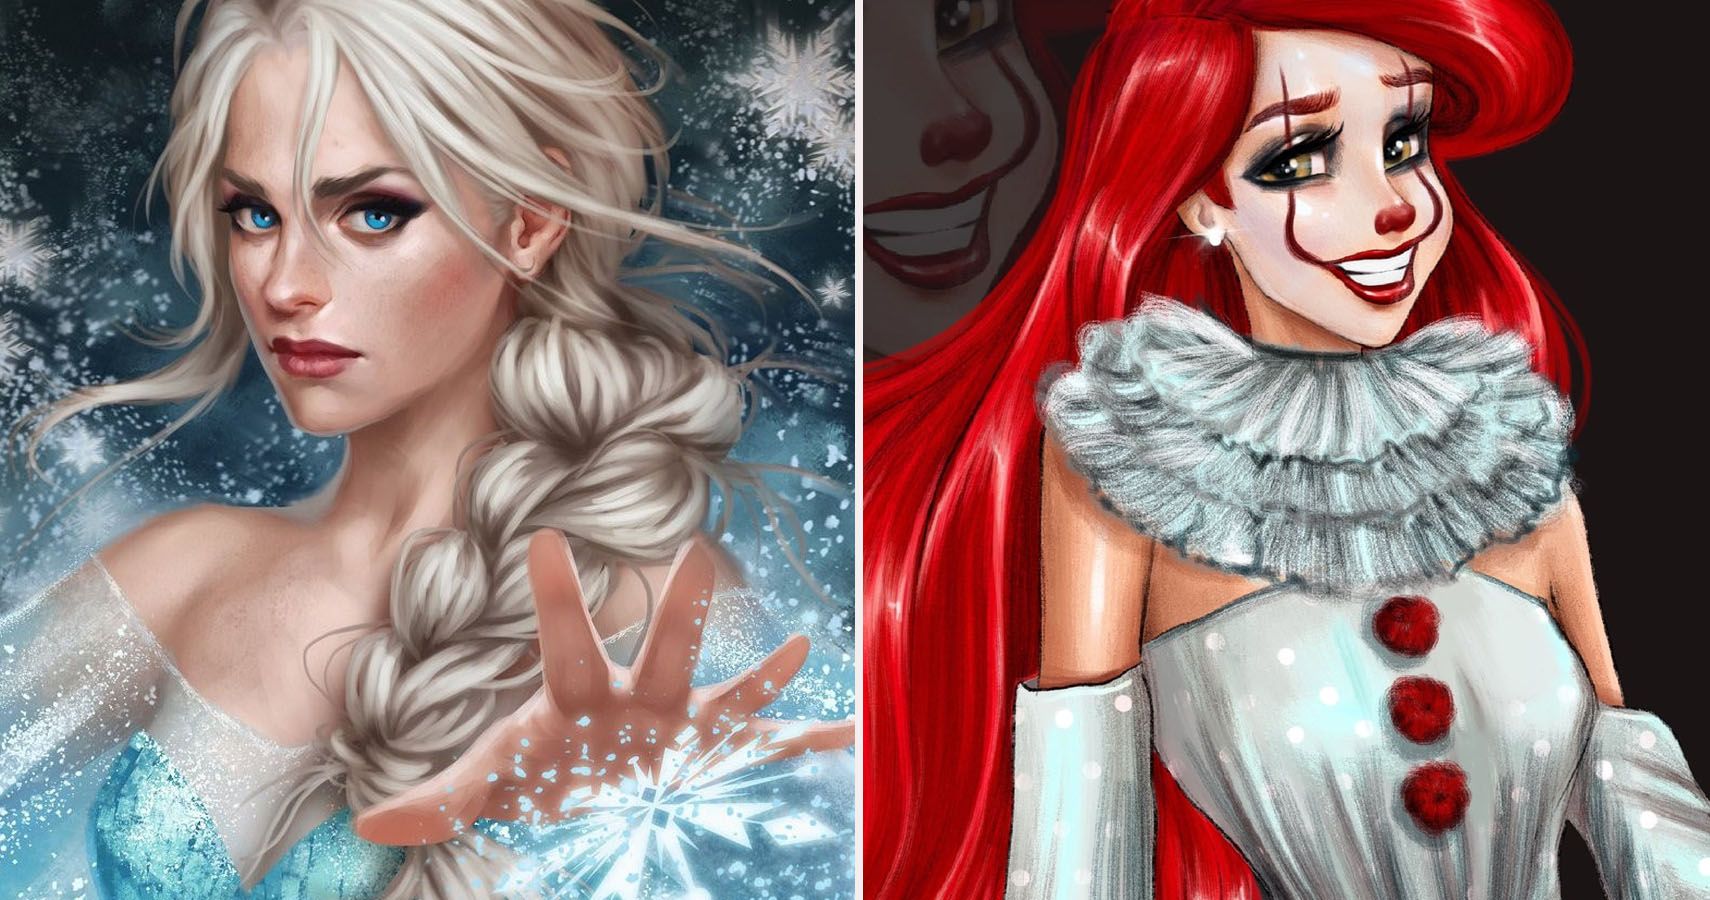 Okay, We're Obsessed With These Disney Cartoon Fan Art Pics!